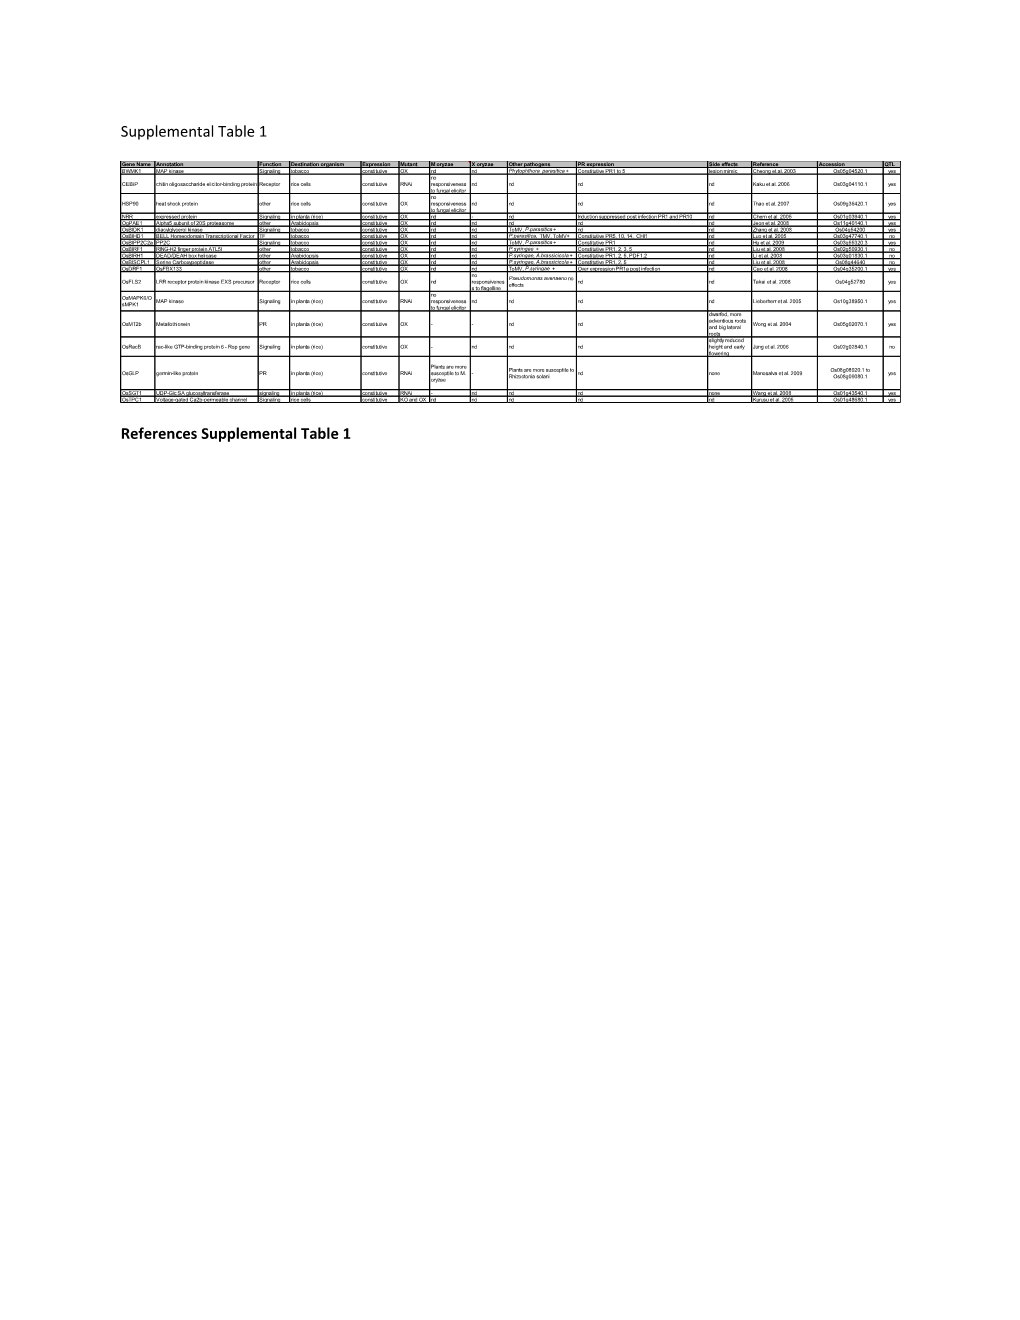 References Supplemental Table 1